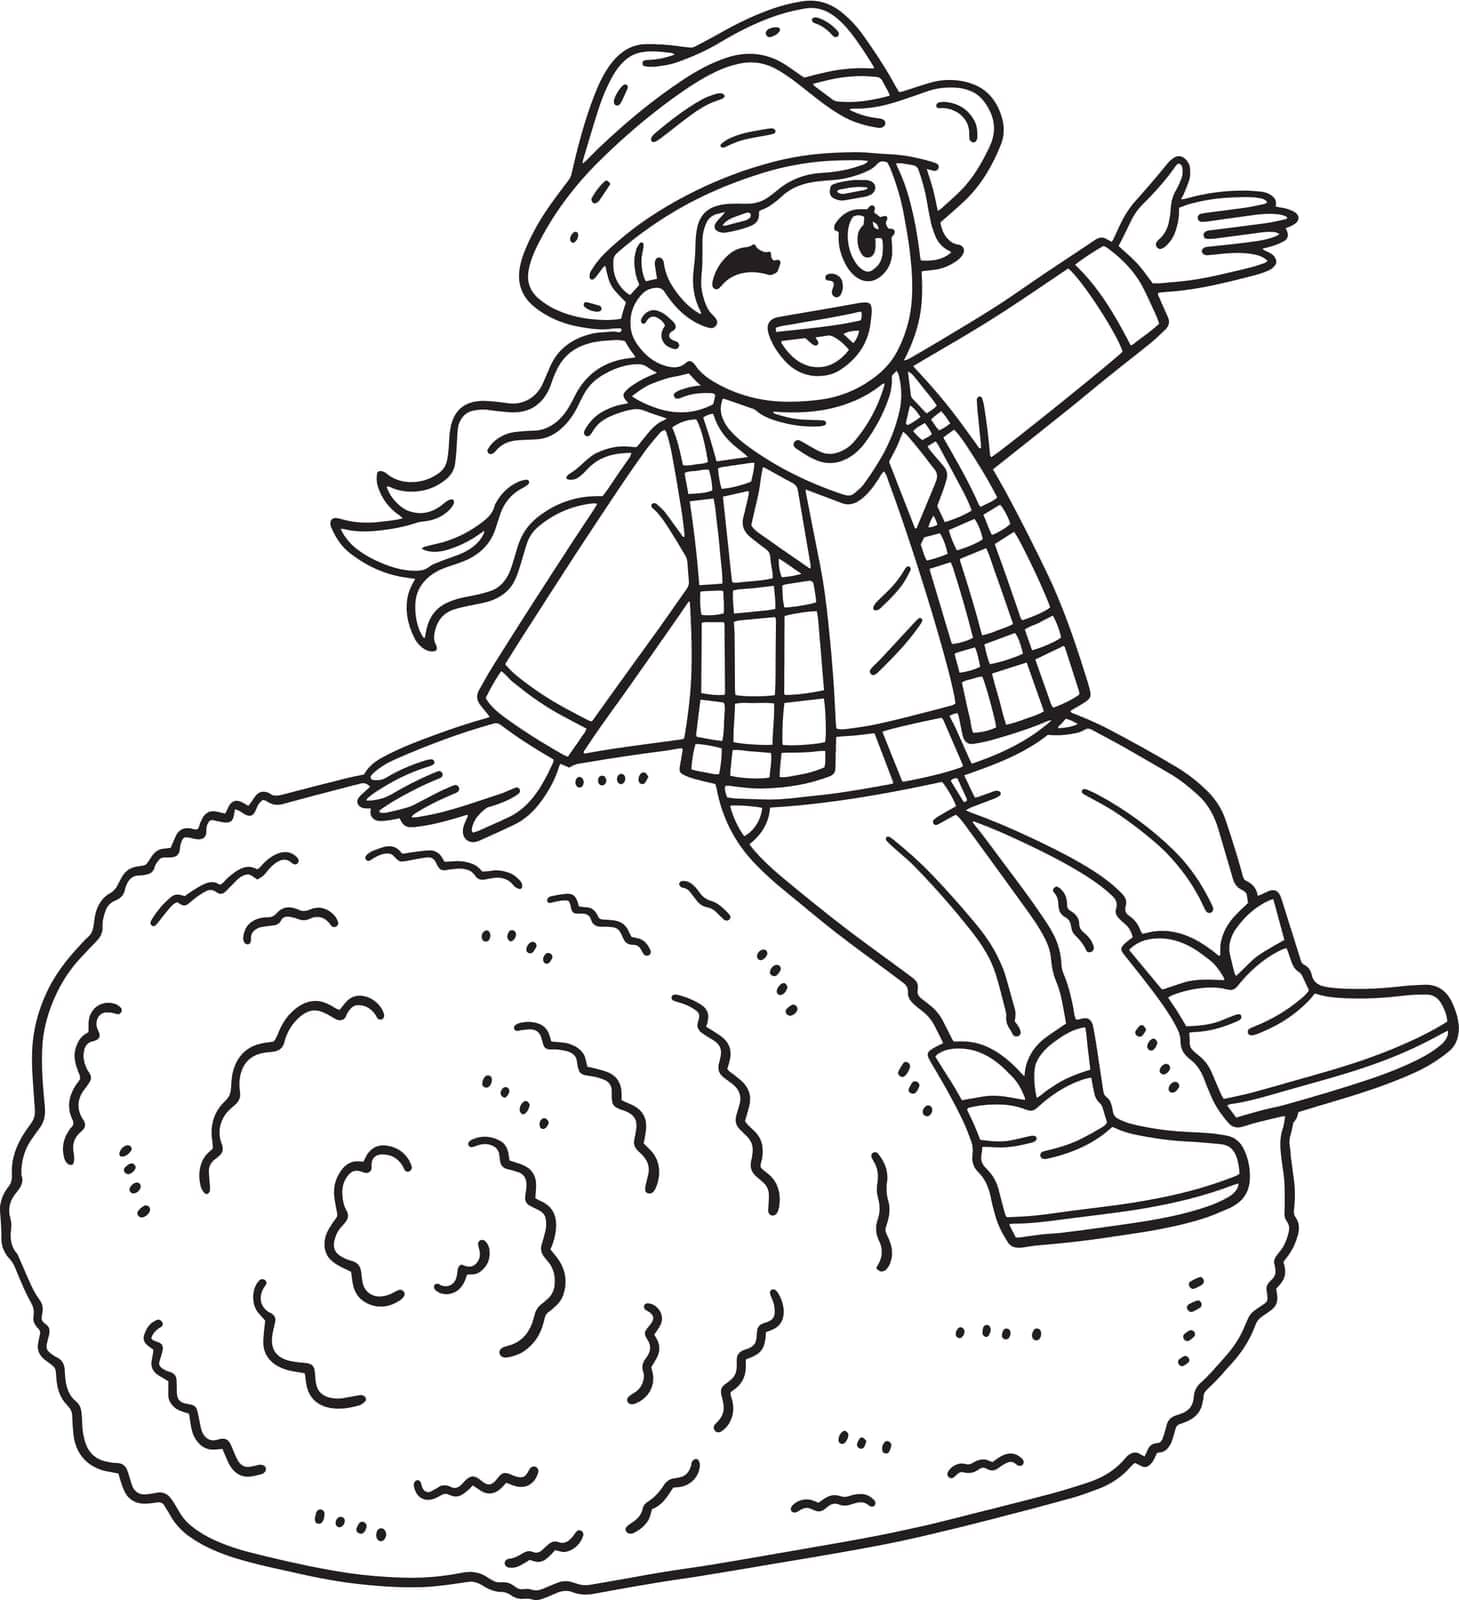 Cowgirl Sitting on Hay Bale Isolated Coloring Page by abbydesign